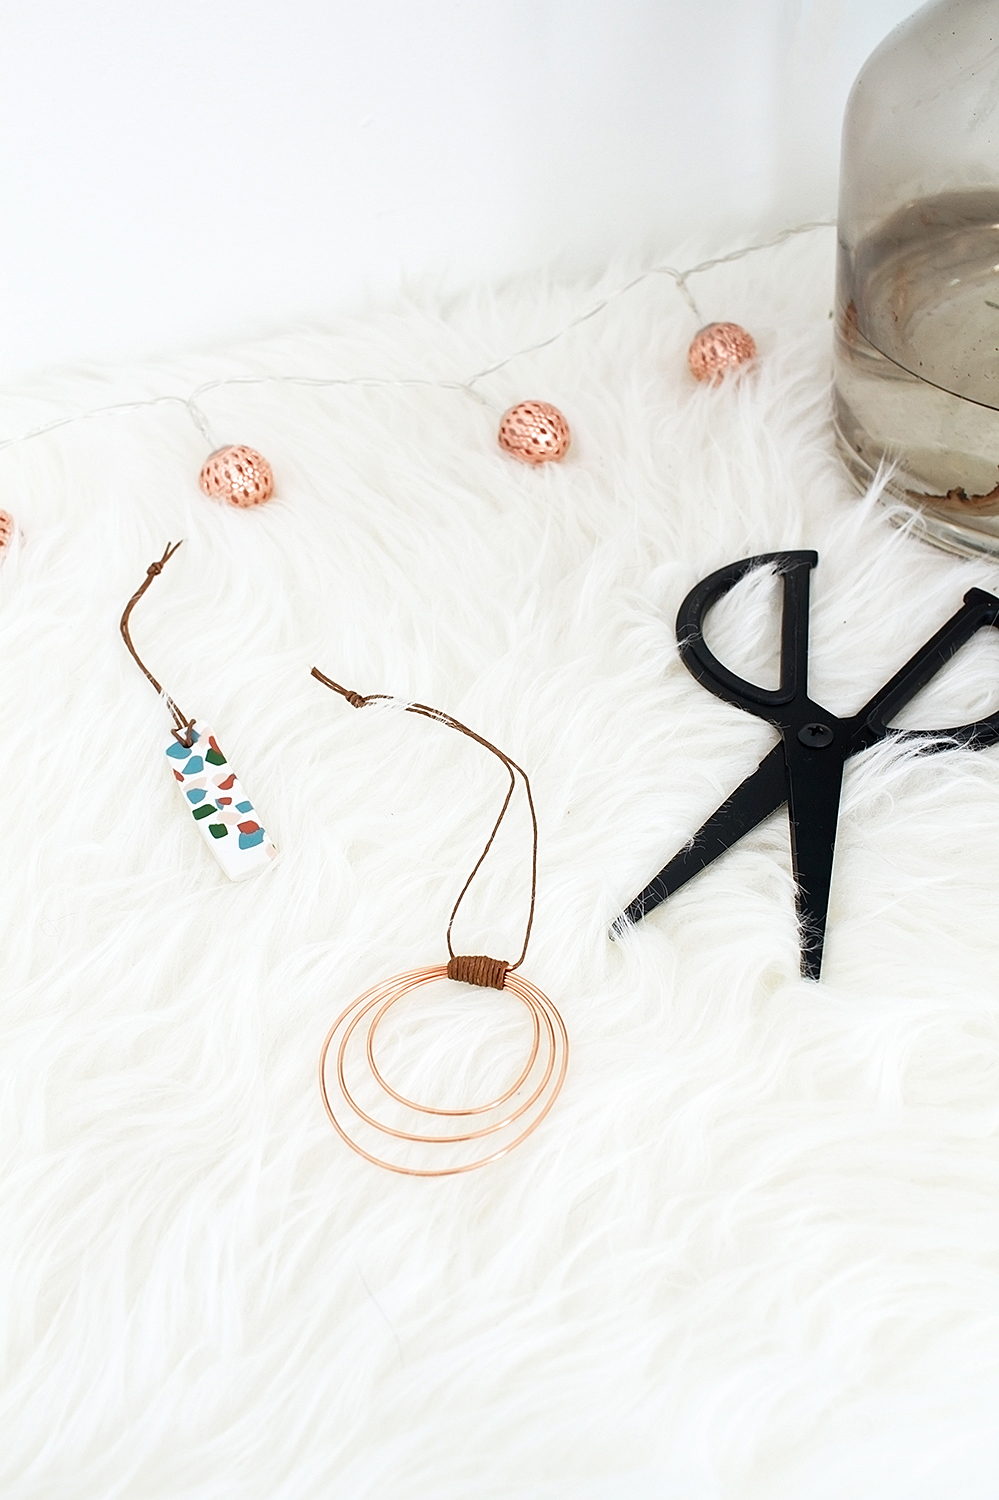 Because you can’t holiday without copper: DIY Copper Wire Hoop Ornaments